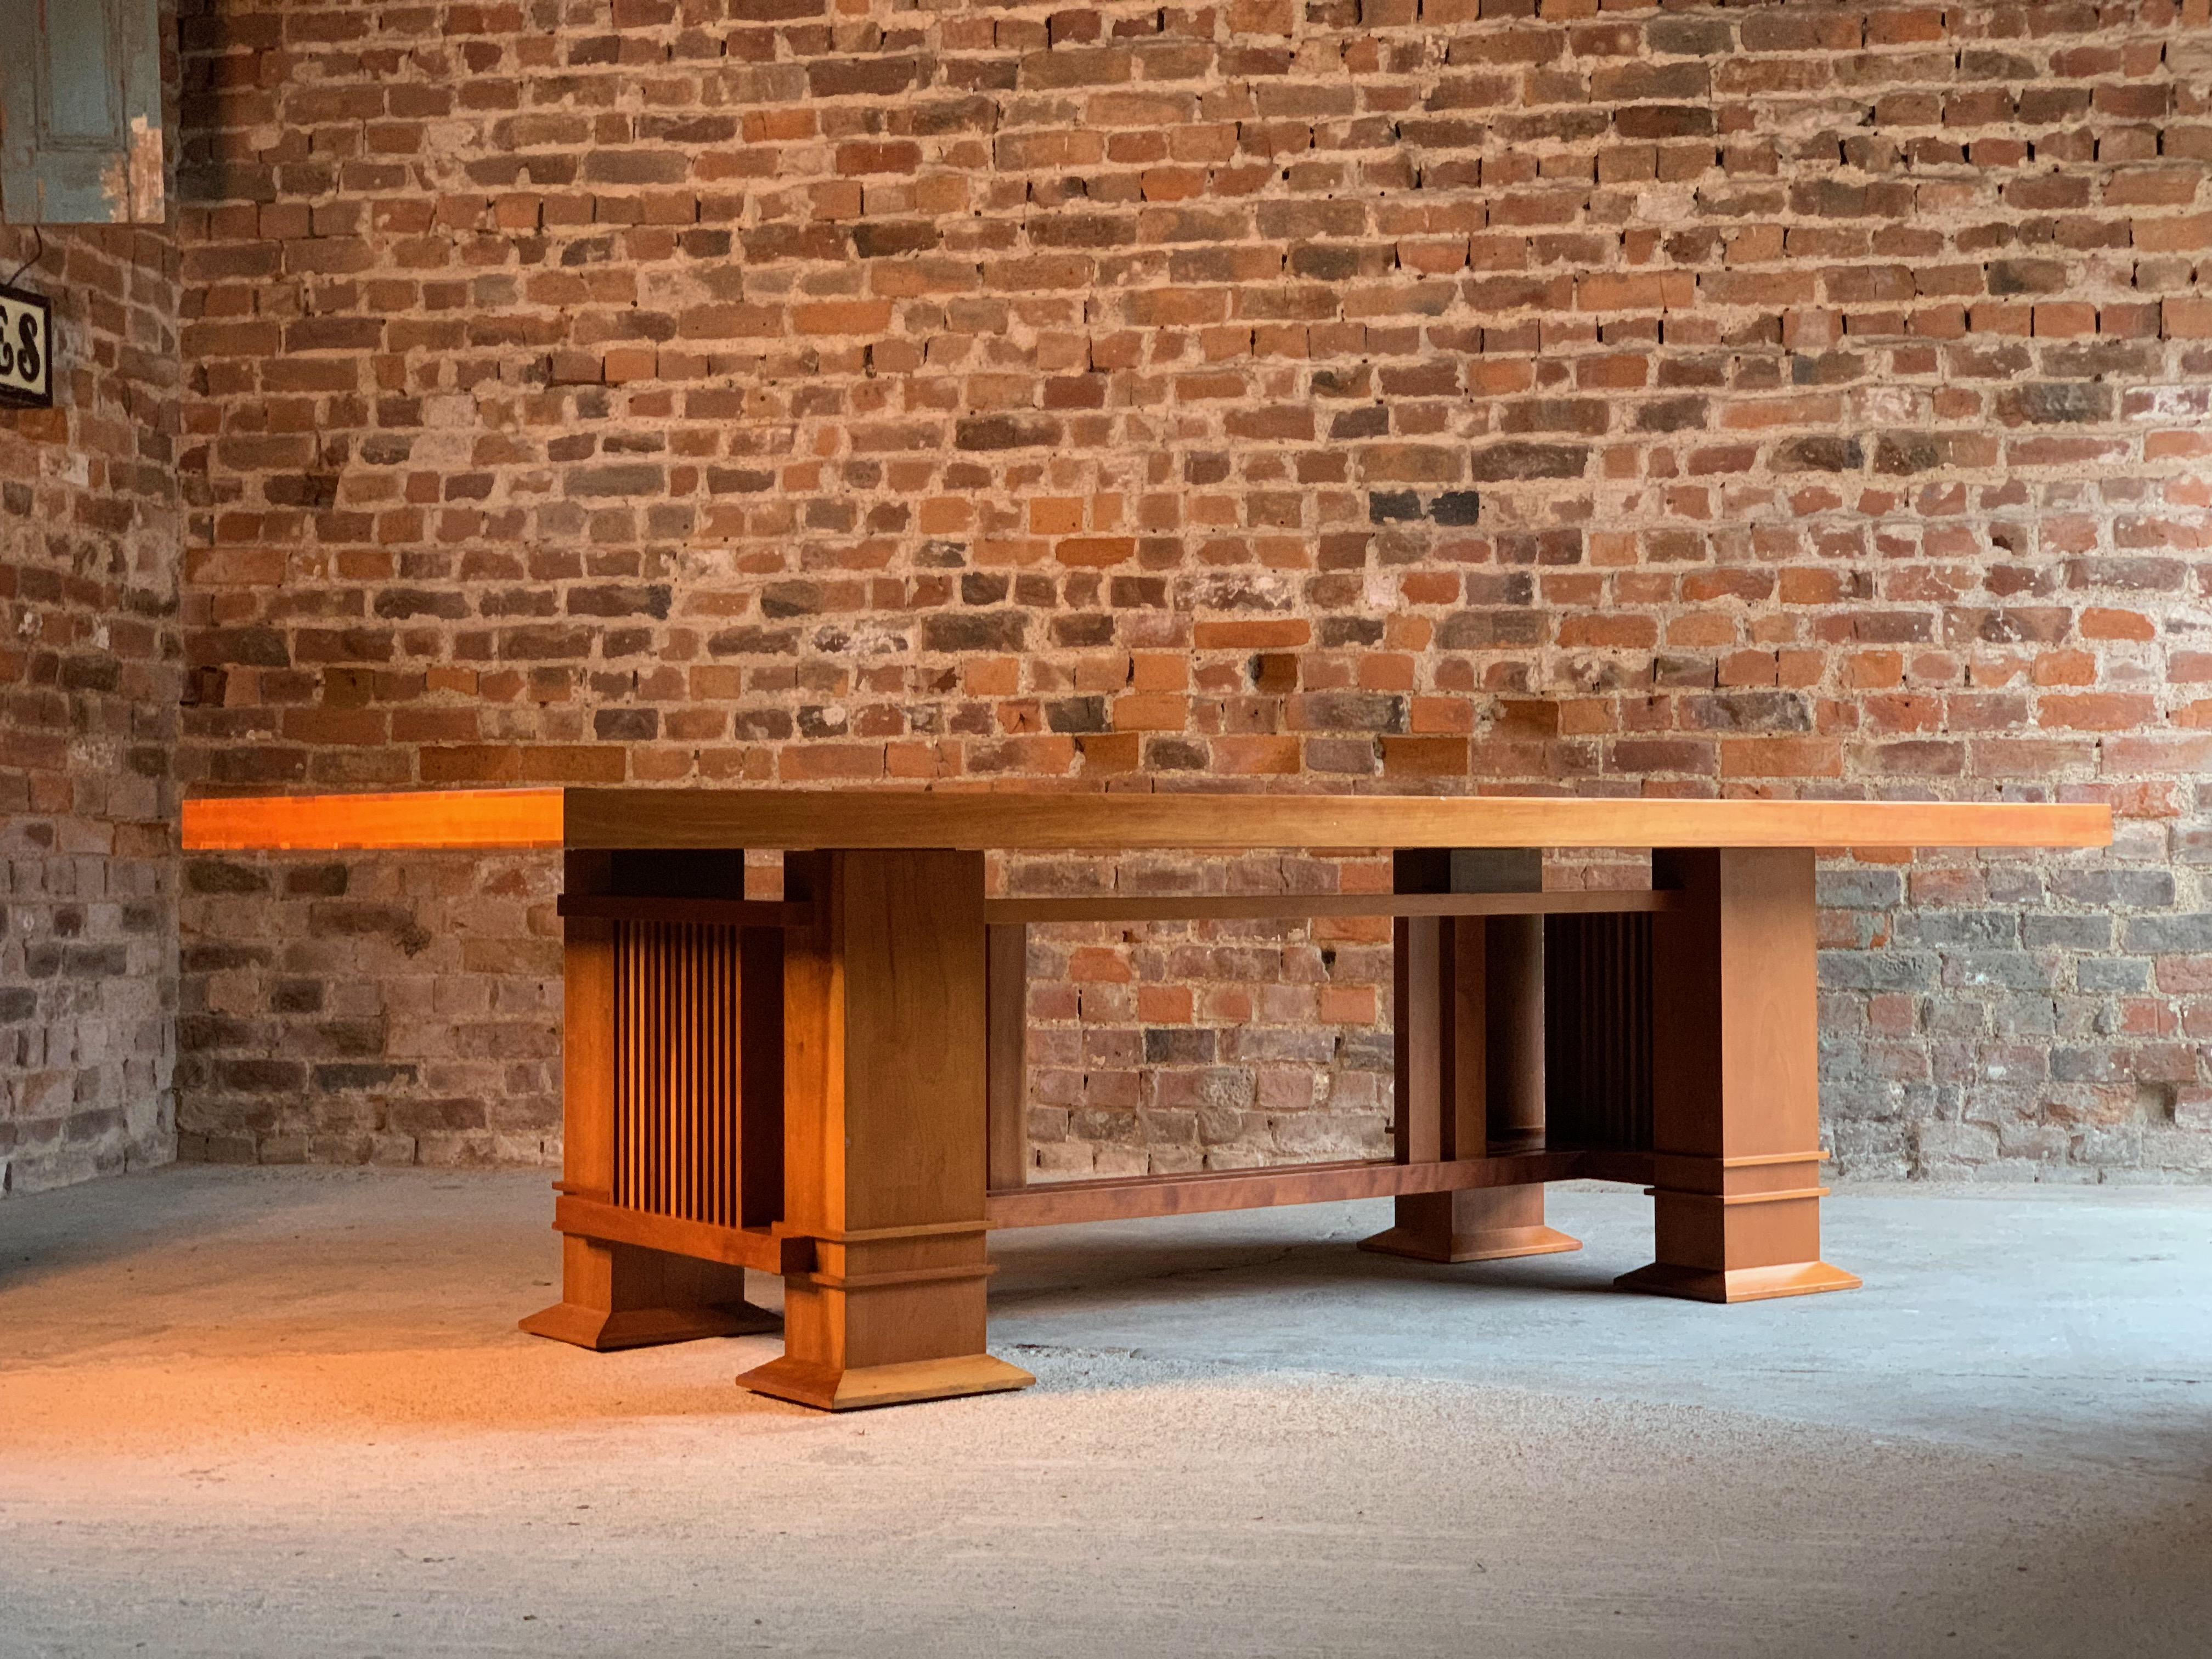 Frank Lloyd Wright 605 Allen table in cherrywood by Cassina, circa 1980s

Frank Lloyd Wright 605 Allen table in cherrywood designed in 1917 and made by Cassina in 1986. This very impressive Frank Lloyd Wright 606 Allen table is marked with the